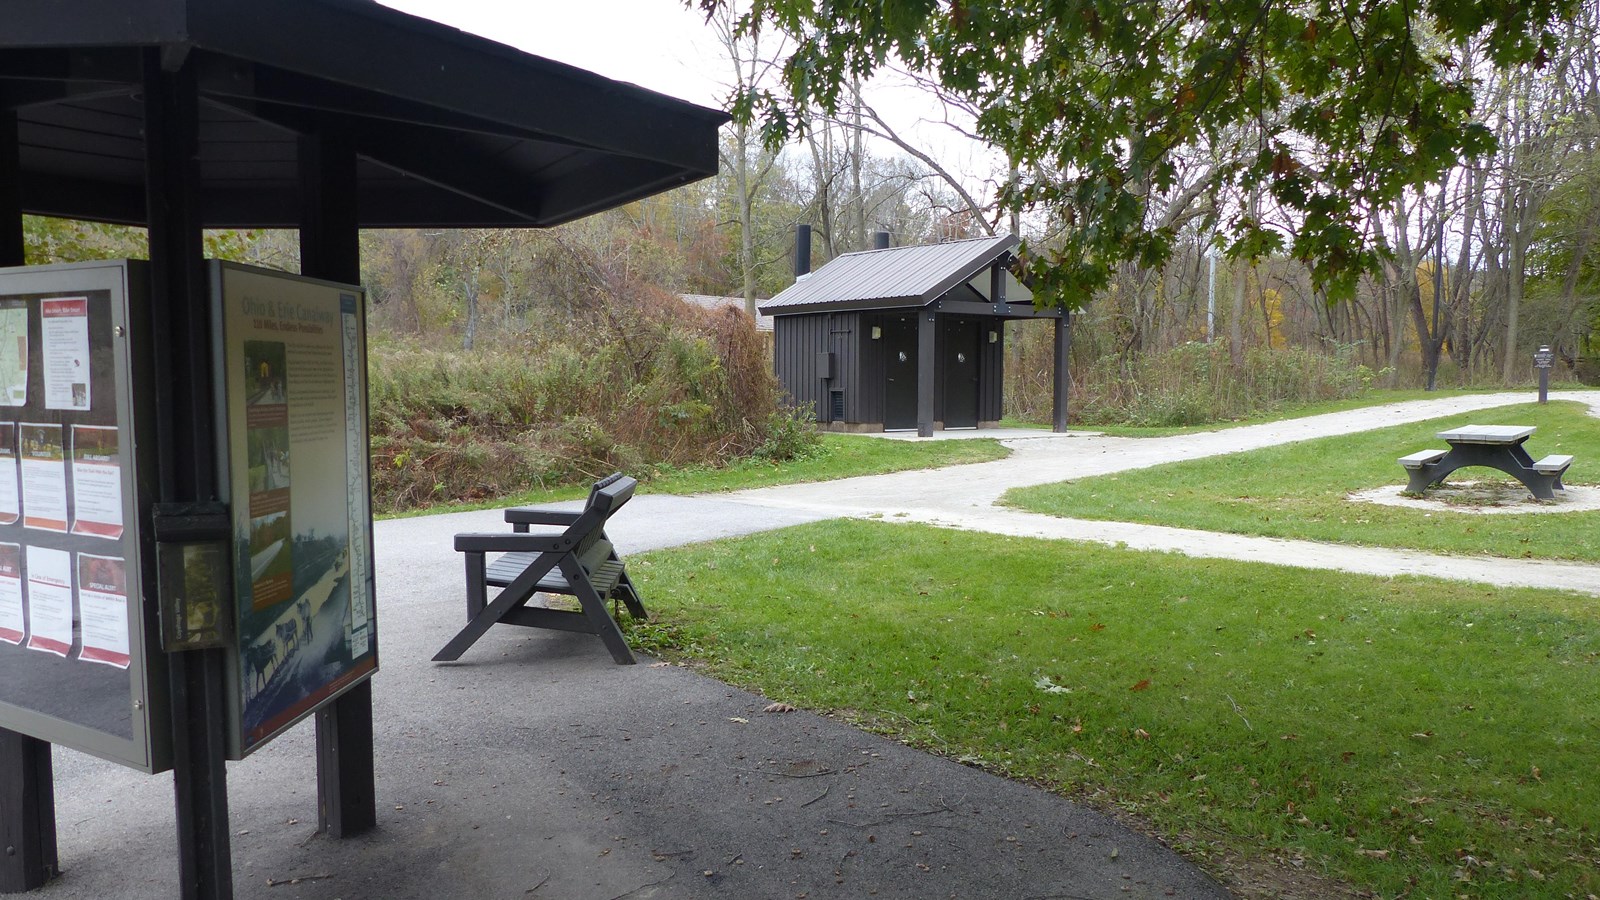 Left to right, path leads from three sided kiosk and bench, past brown restroom and picnic table.